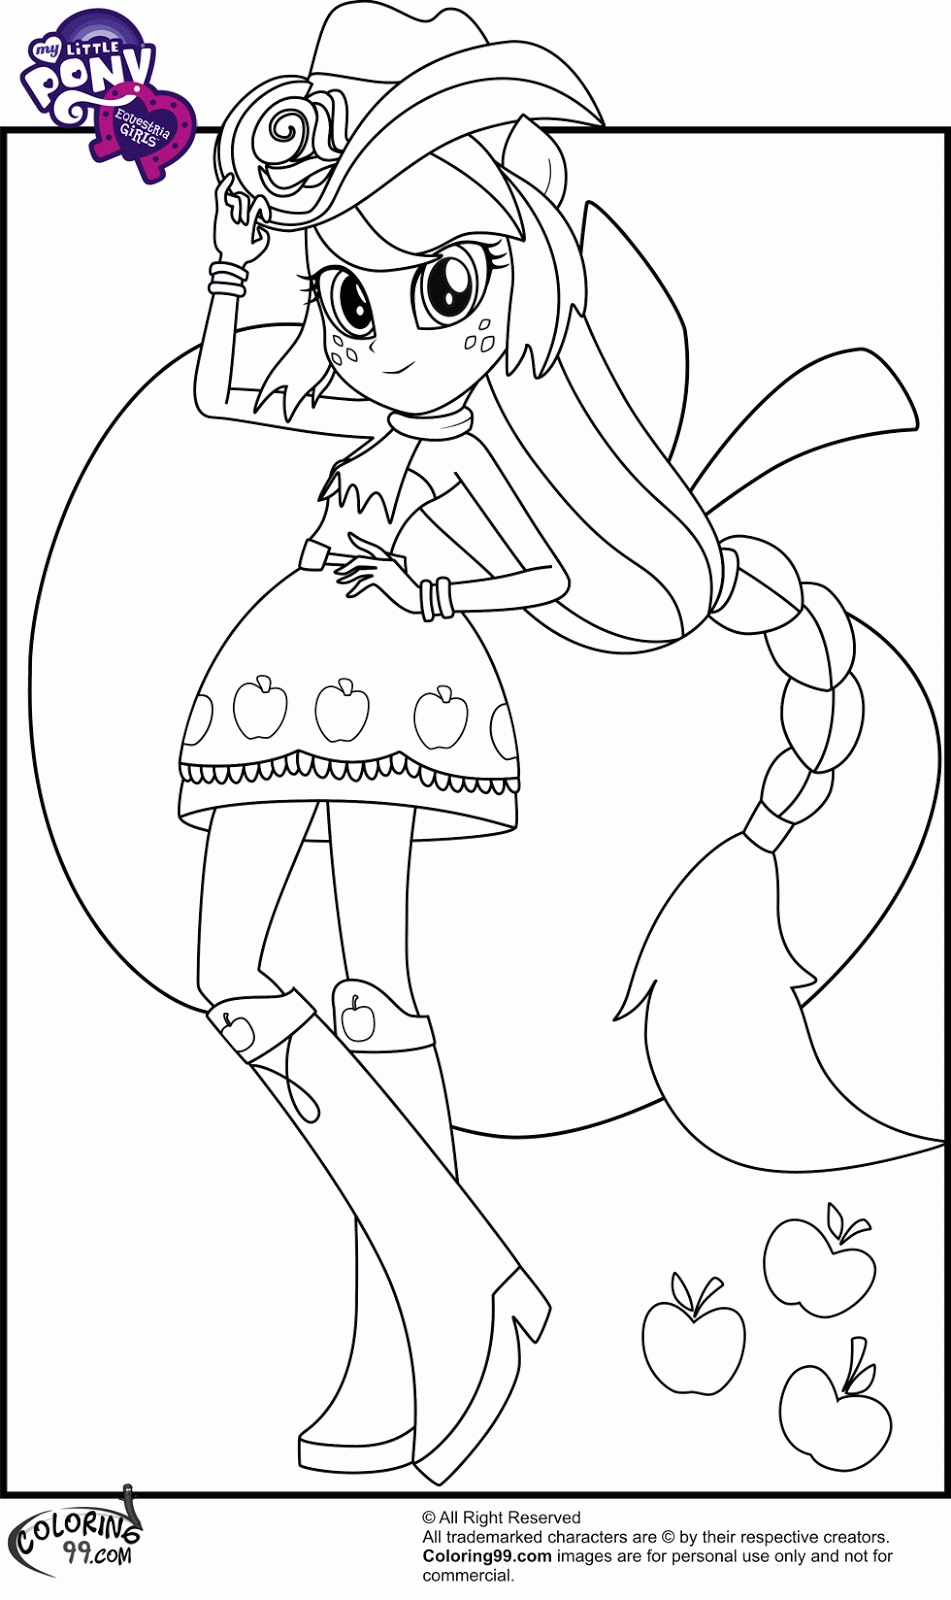 My Little Pony: Equestria Girls Coloring Pages - Coloring Home